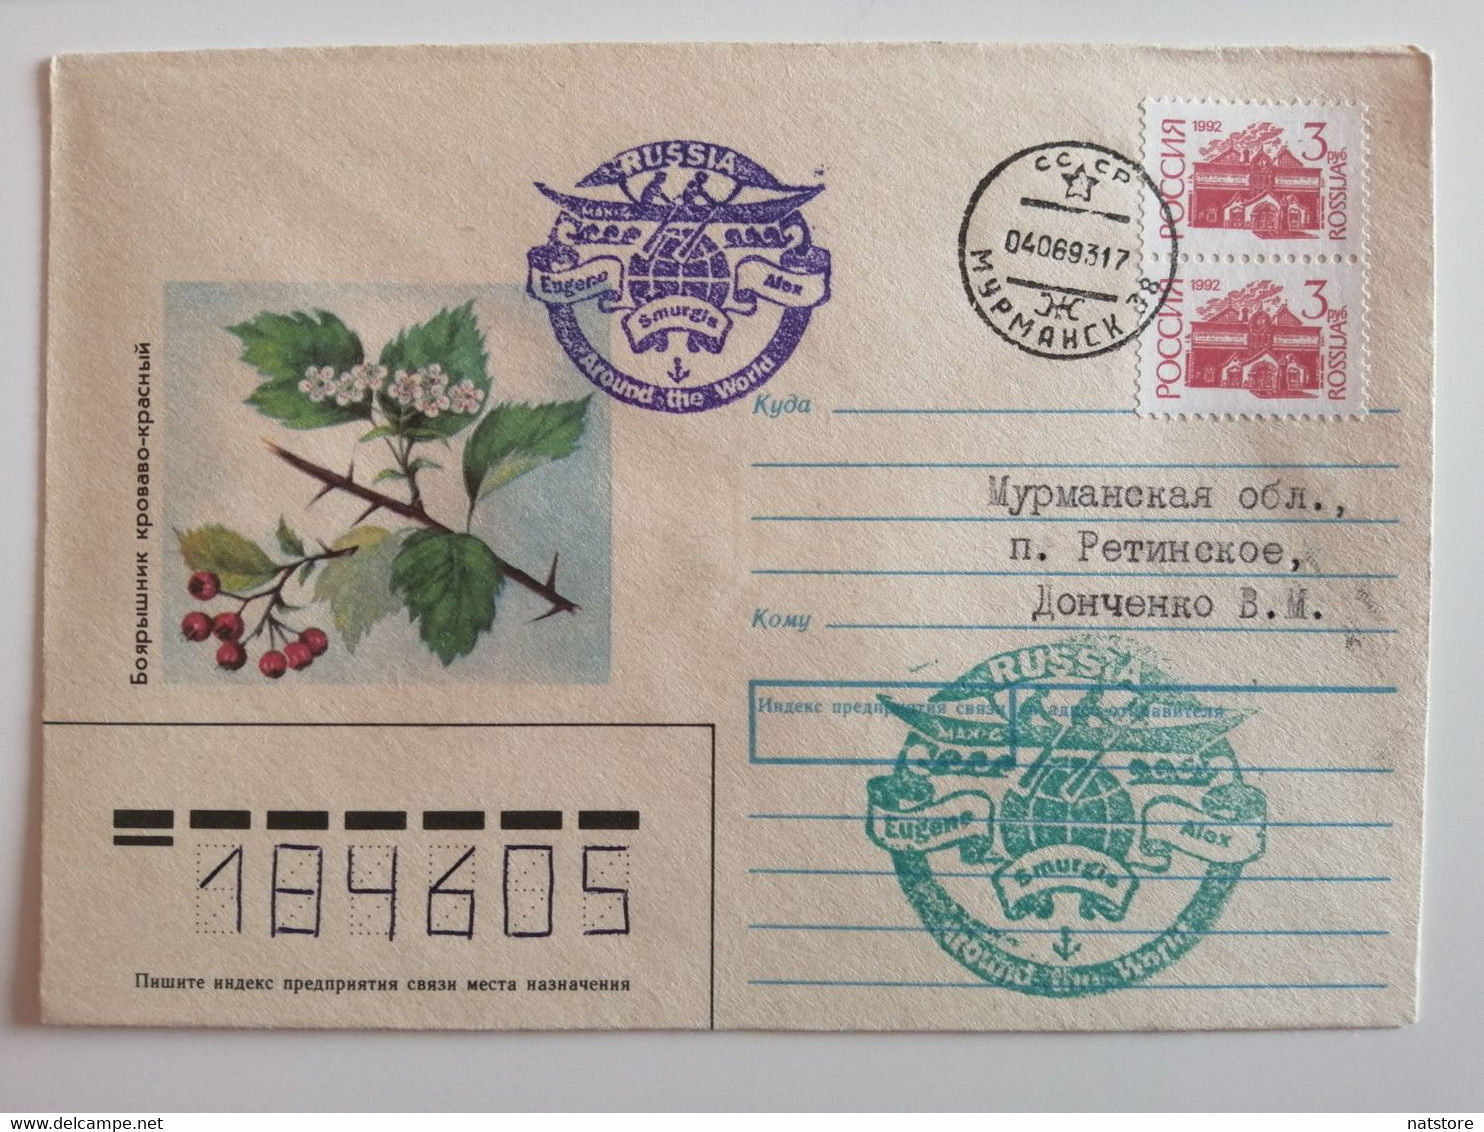 1989..USSR. COVER WITH GLUED STAMP AND SPECIAL CANCELLATION ''RUSSIA..EUGENE ALEX SMURGIS..AROUND THE WORLD'' - Programmi Di Ricerca